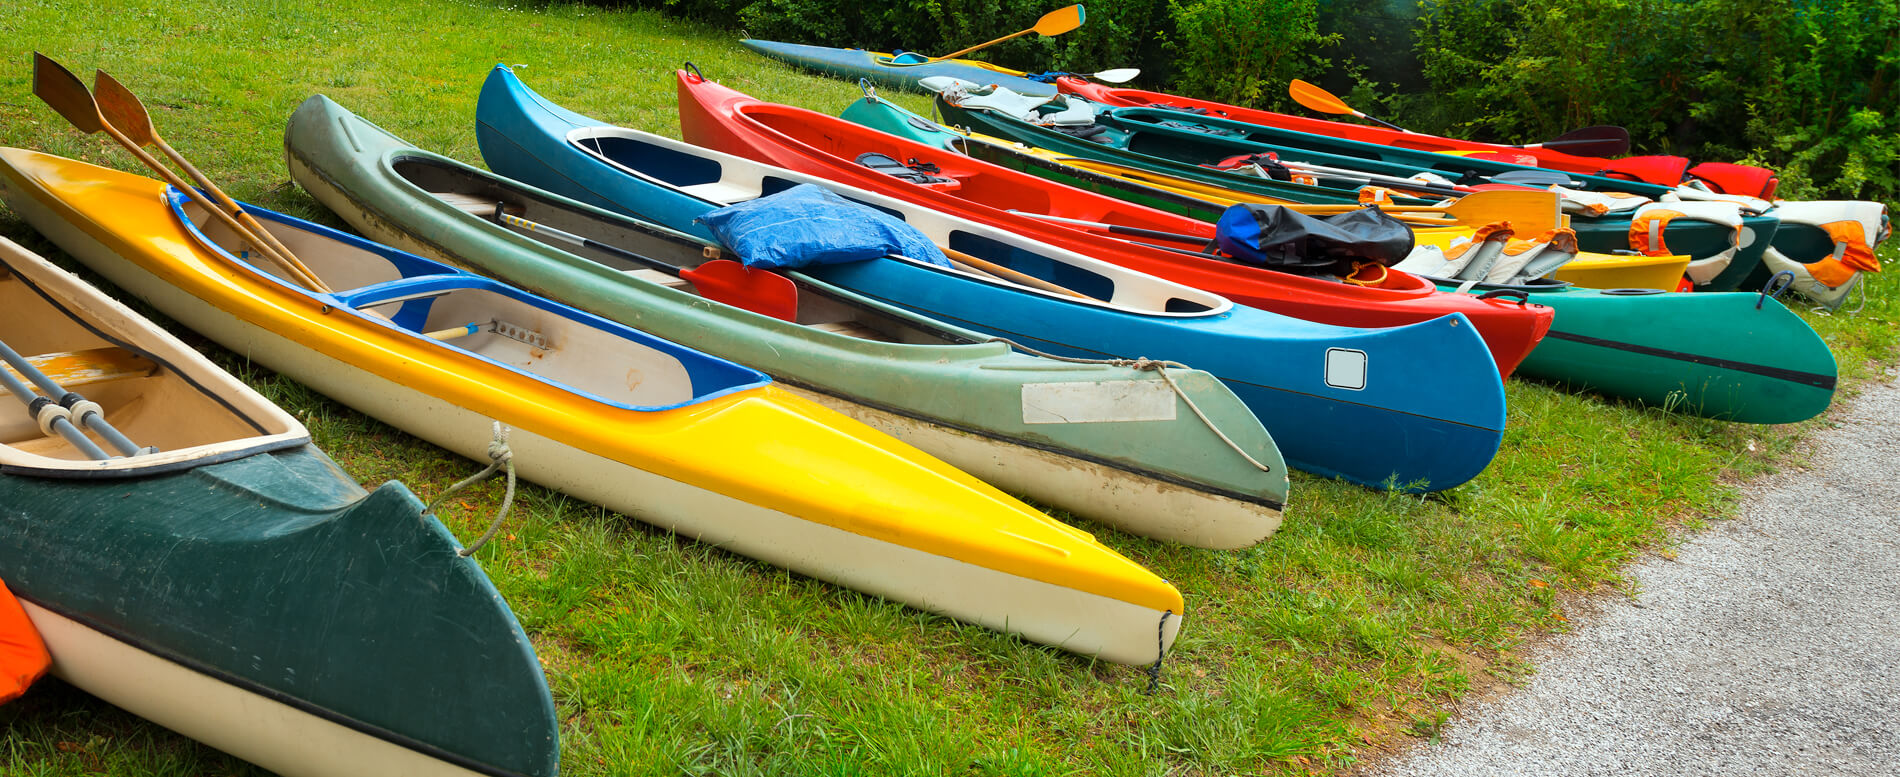 Canoe vs Kayak: Which One Is Best For You?